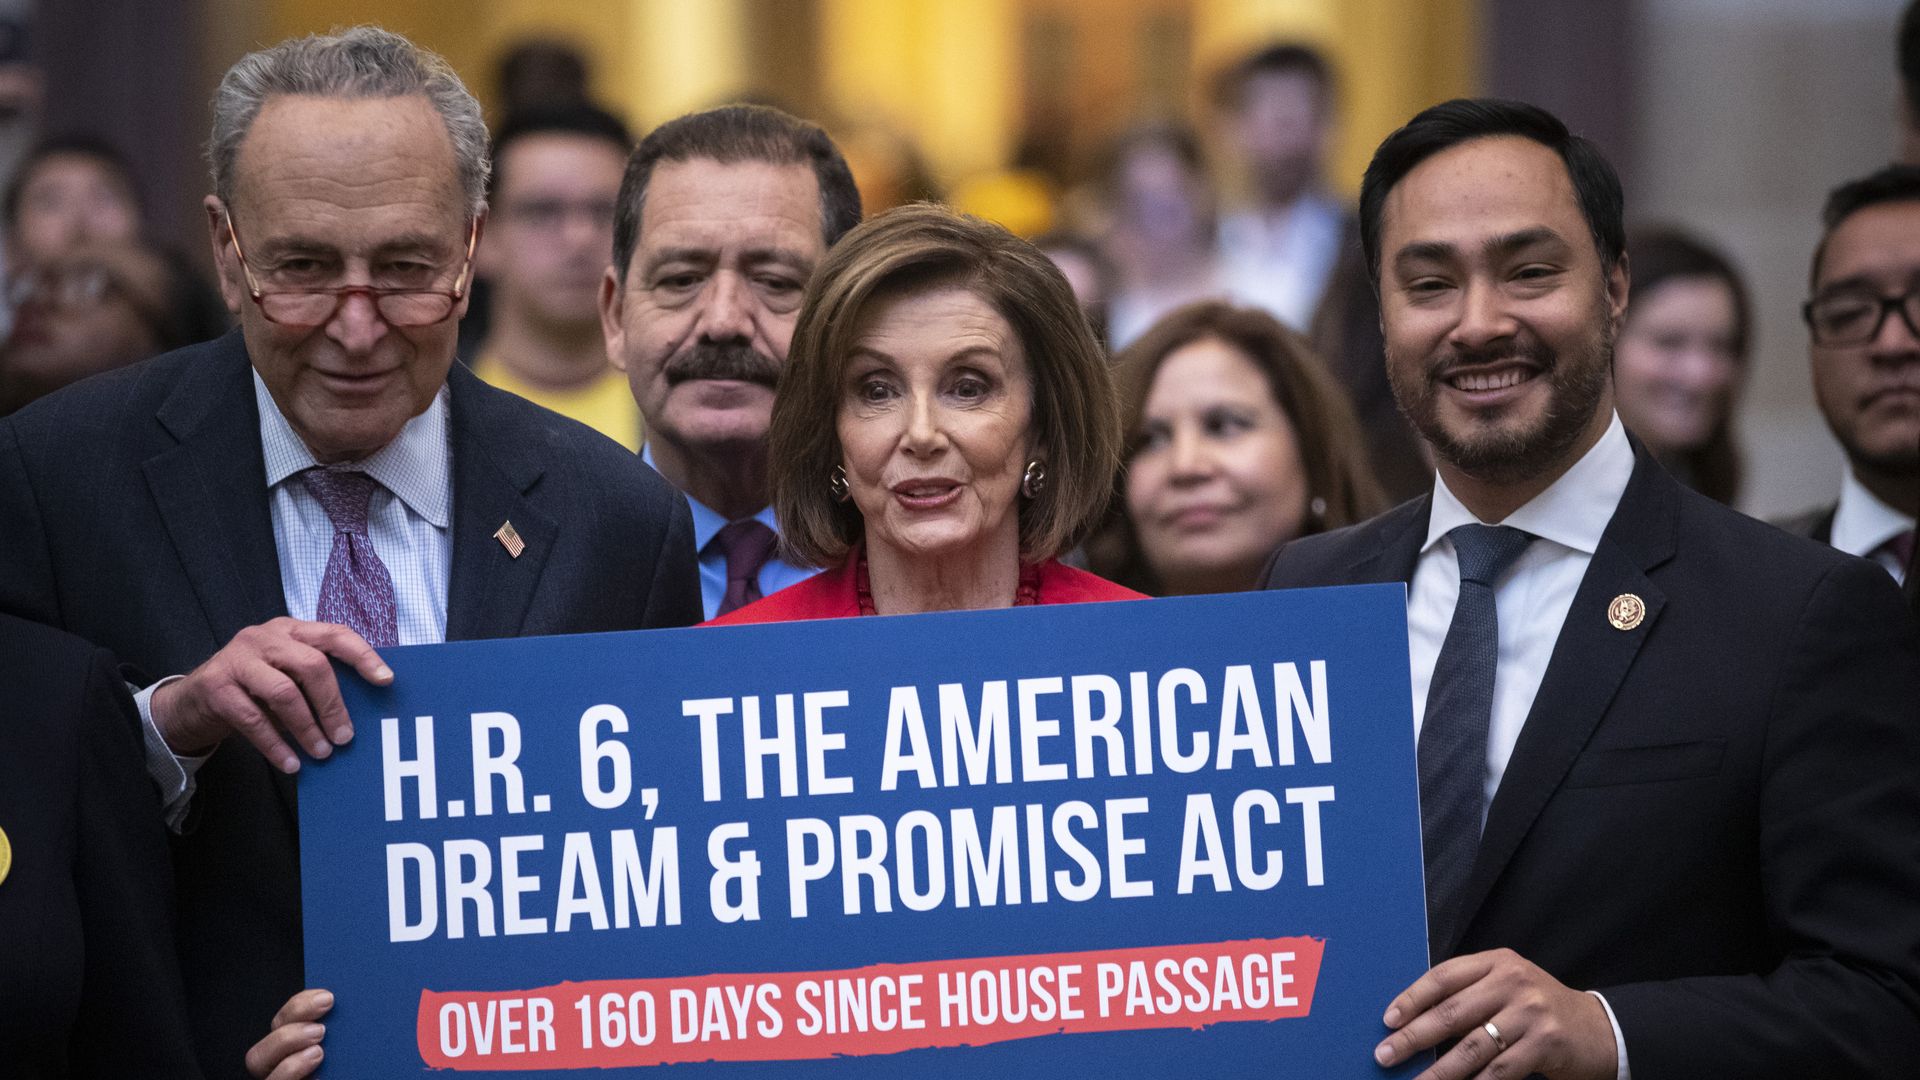 Picture of Chuck Schumer, Nancy Pelosi and Joaquin Castro carrying a sign promoting the American Dream and Promise Act of 2019